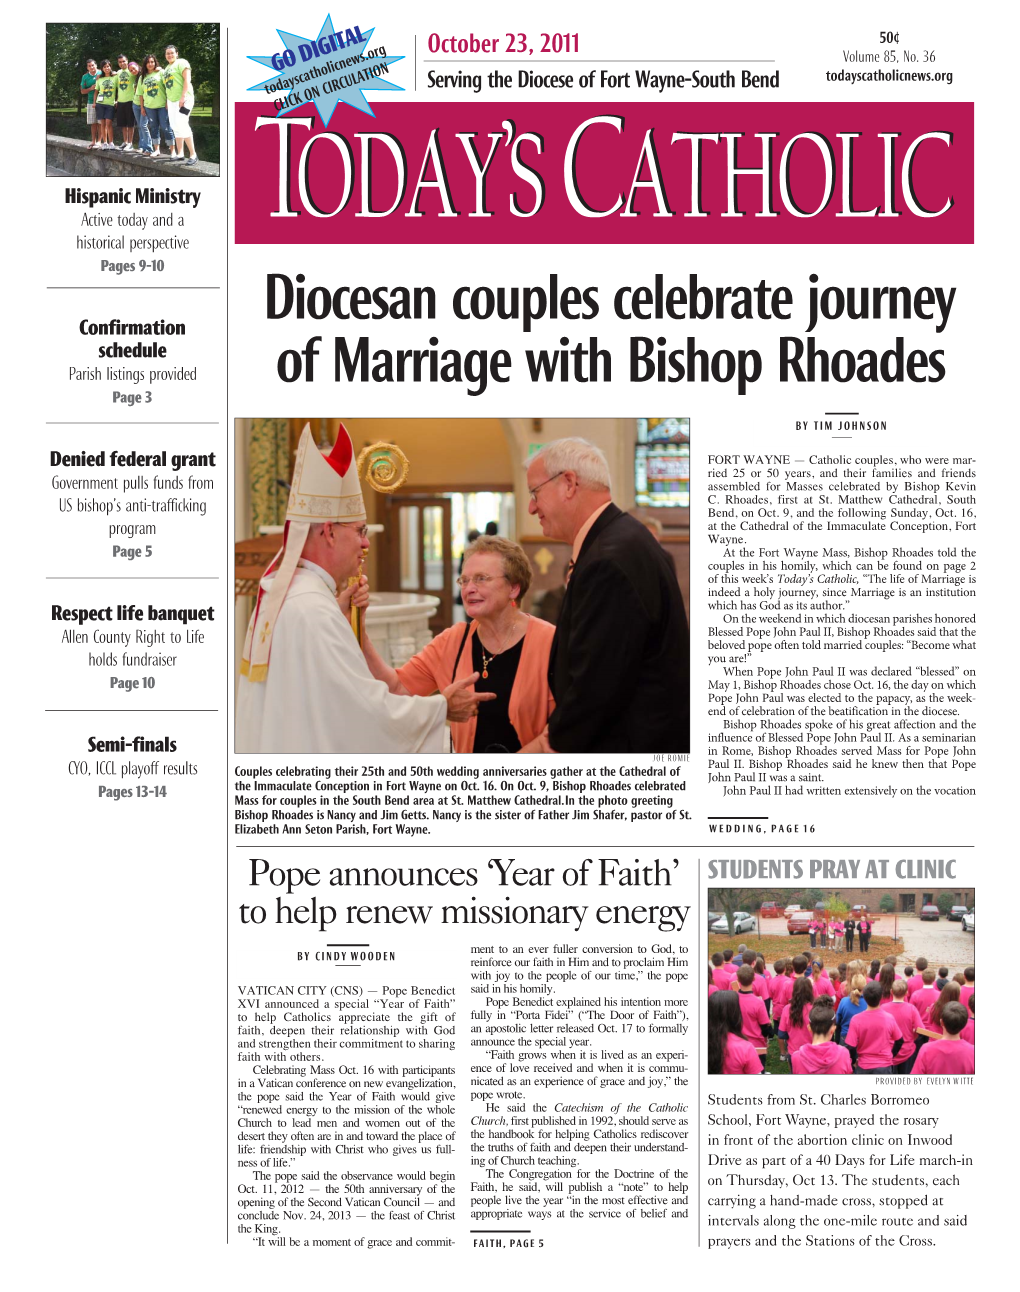 Diocesan Couples Celebrate Journey of Marriage with Bishop Rhoades